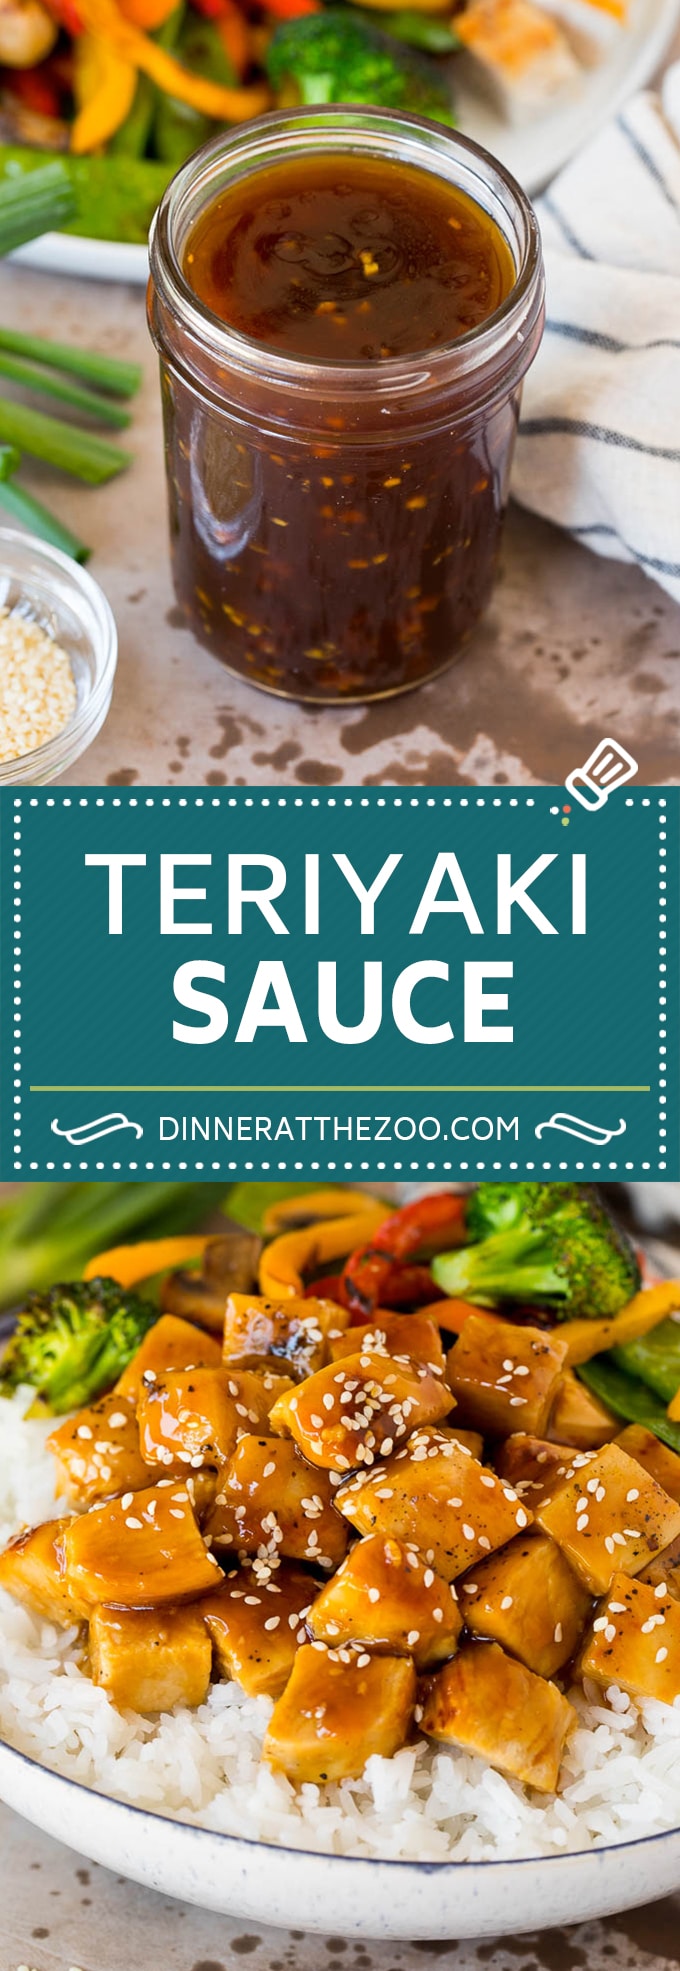 This homemade teriyaki sauce is a blend of soy sauce, brown sugar, garlic, ginger and sesame oil, all simmered together to make a sweet and savory condiment.